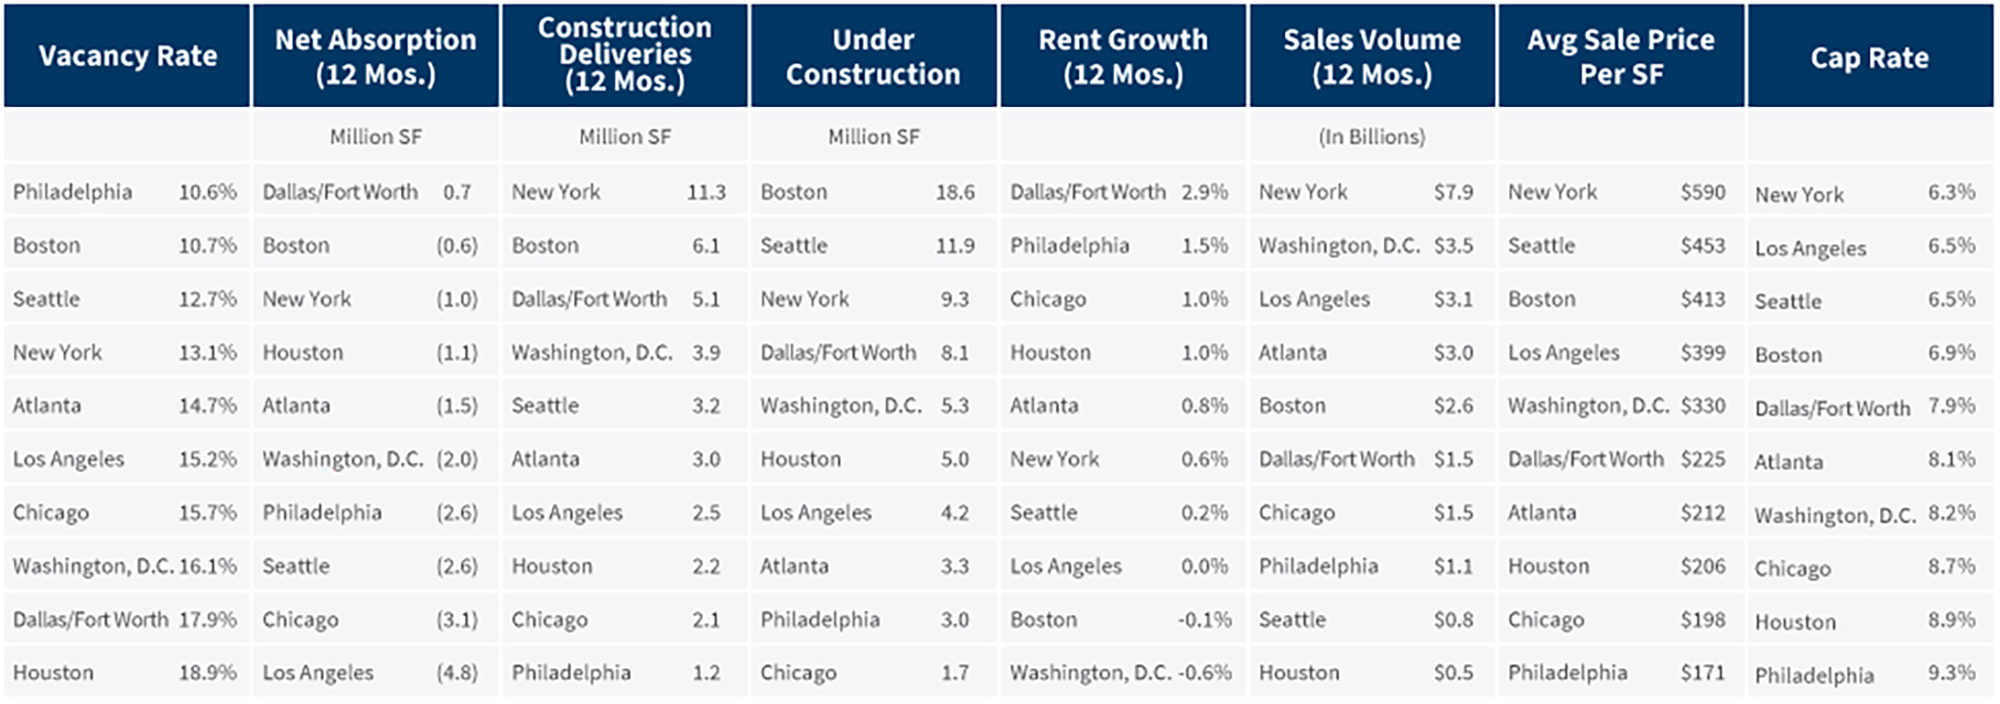 10 Largest Office Markets (by Inventory) Comparison